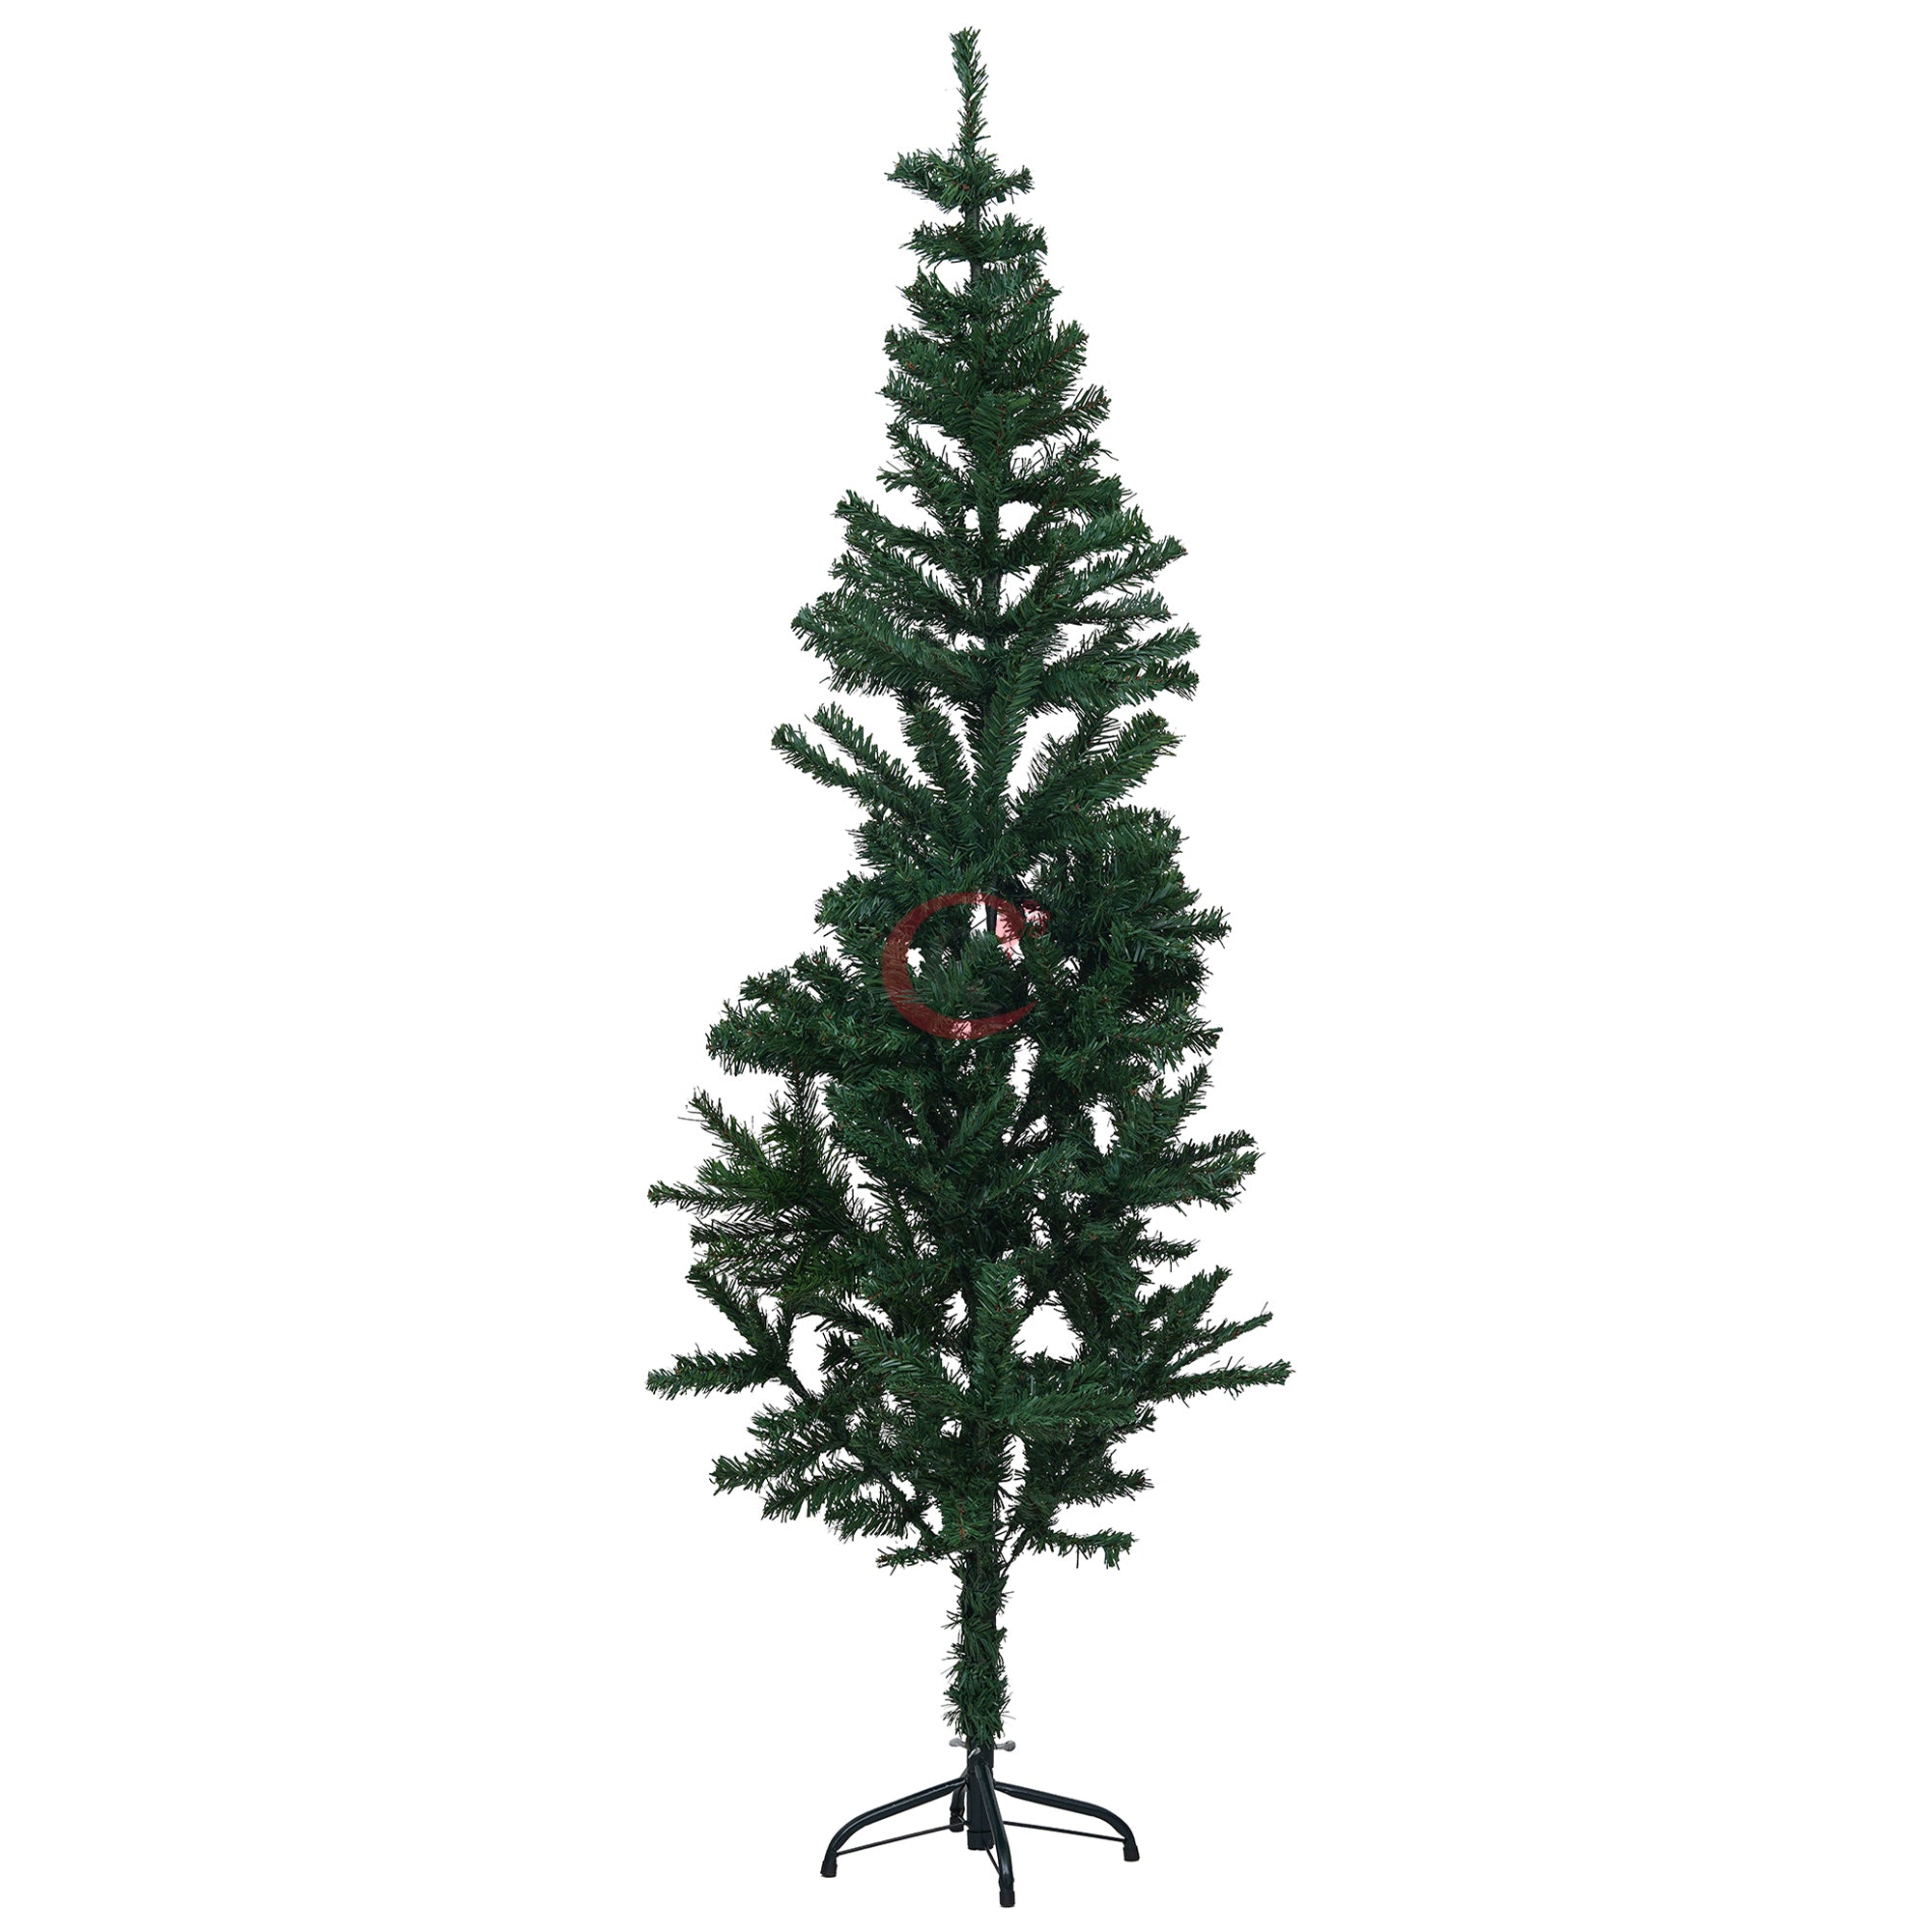 eCraftIndia 6 Feet Green Artificial Christmas Tree Xmas Pine Tree with Metal Stand - Xmas Tree for Indoor, Outdoor, Home, Living Room, Office, Church Decor - Merry Christmas Decoration Item 2